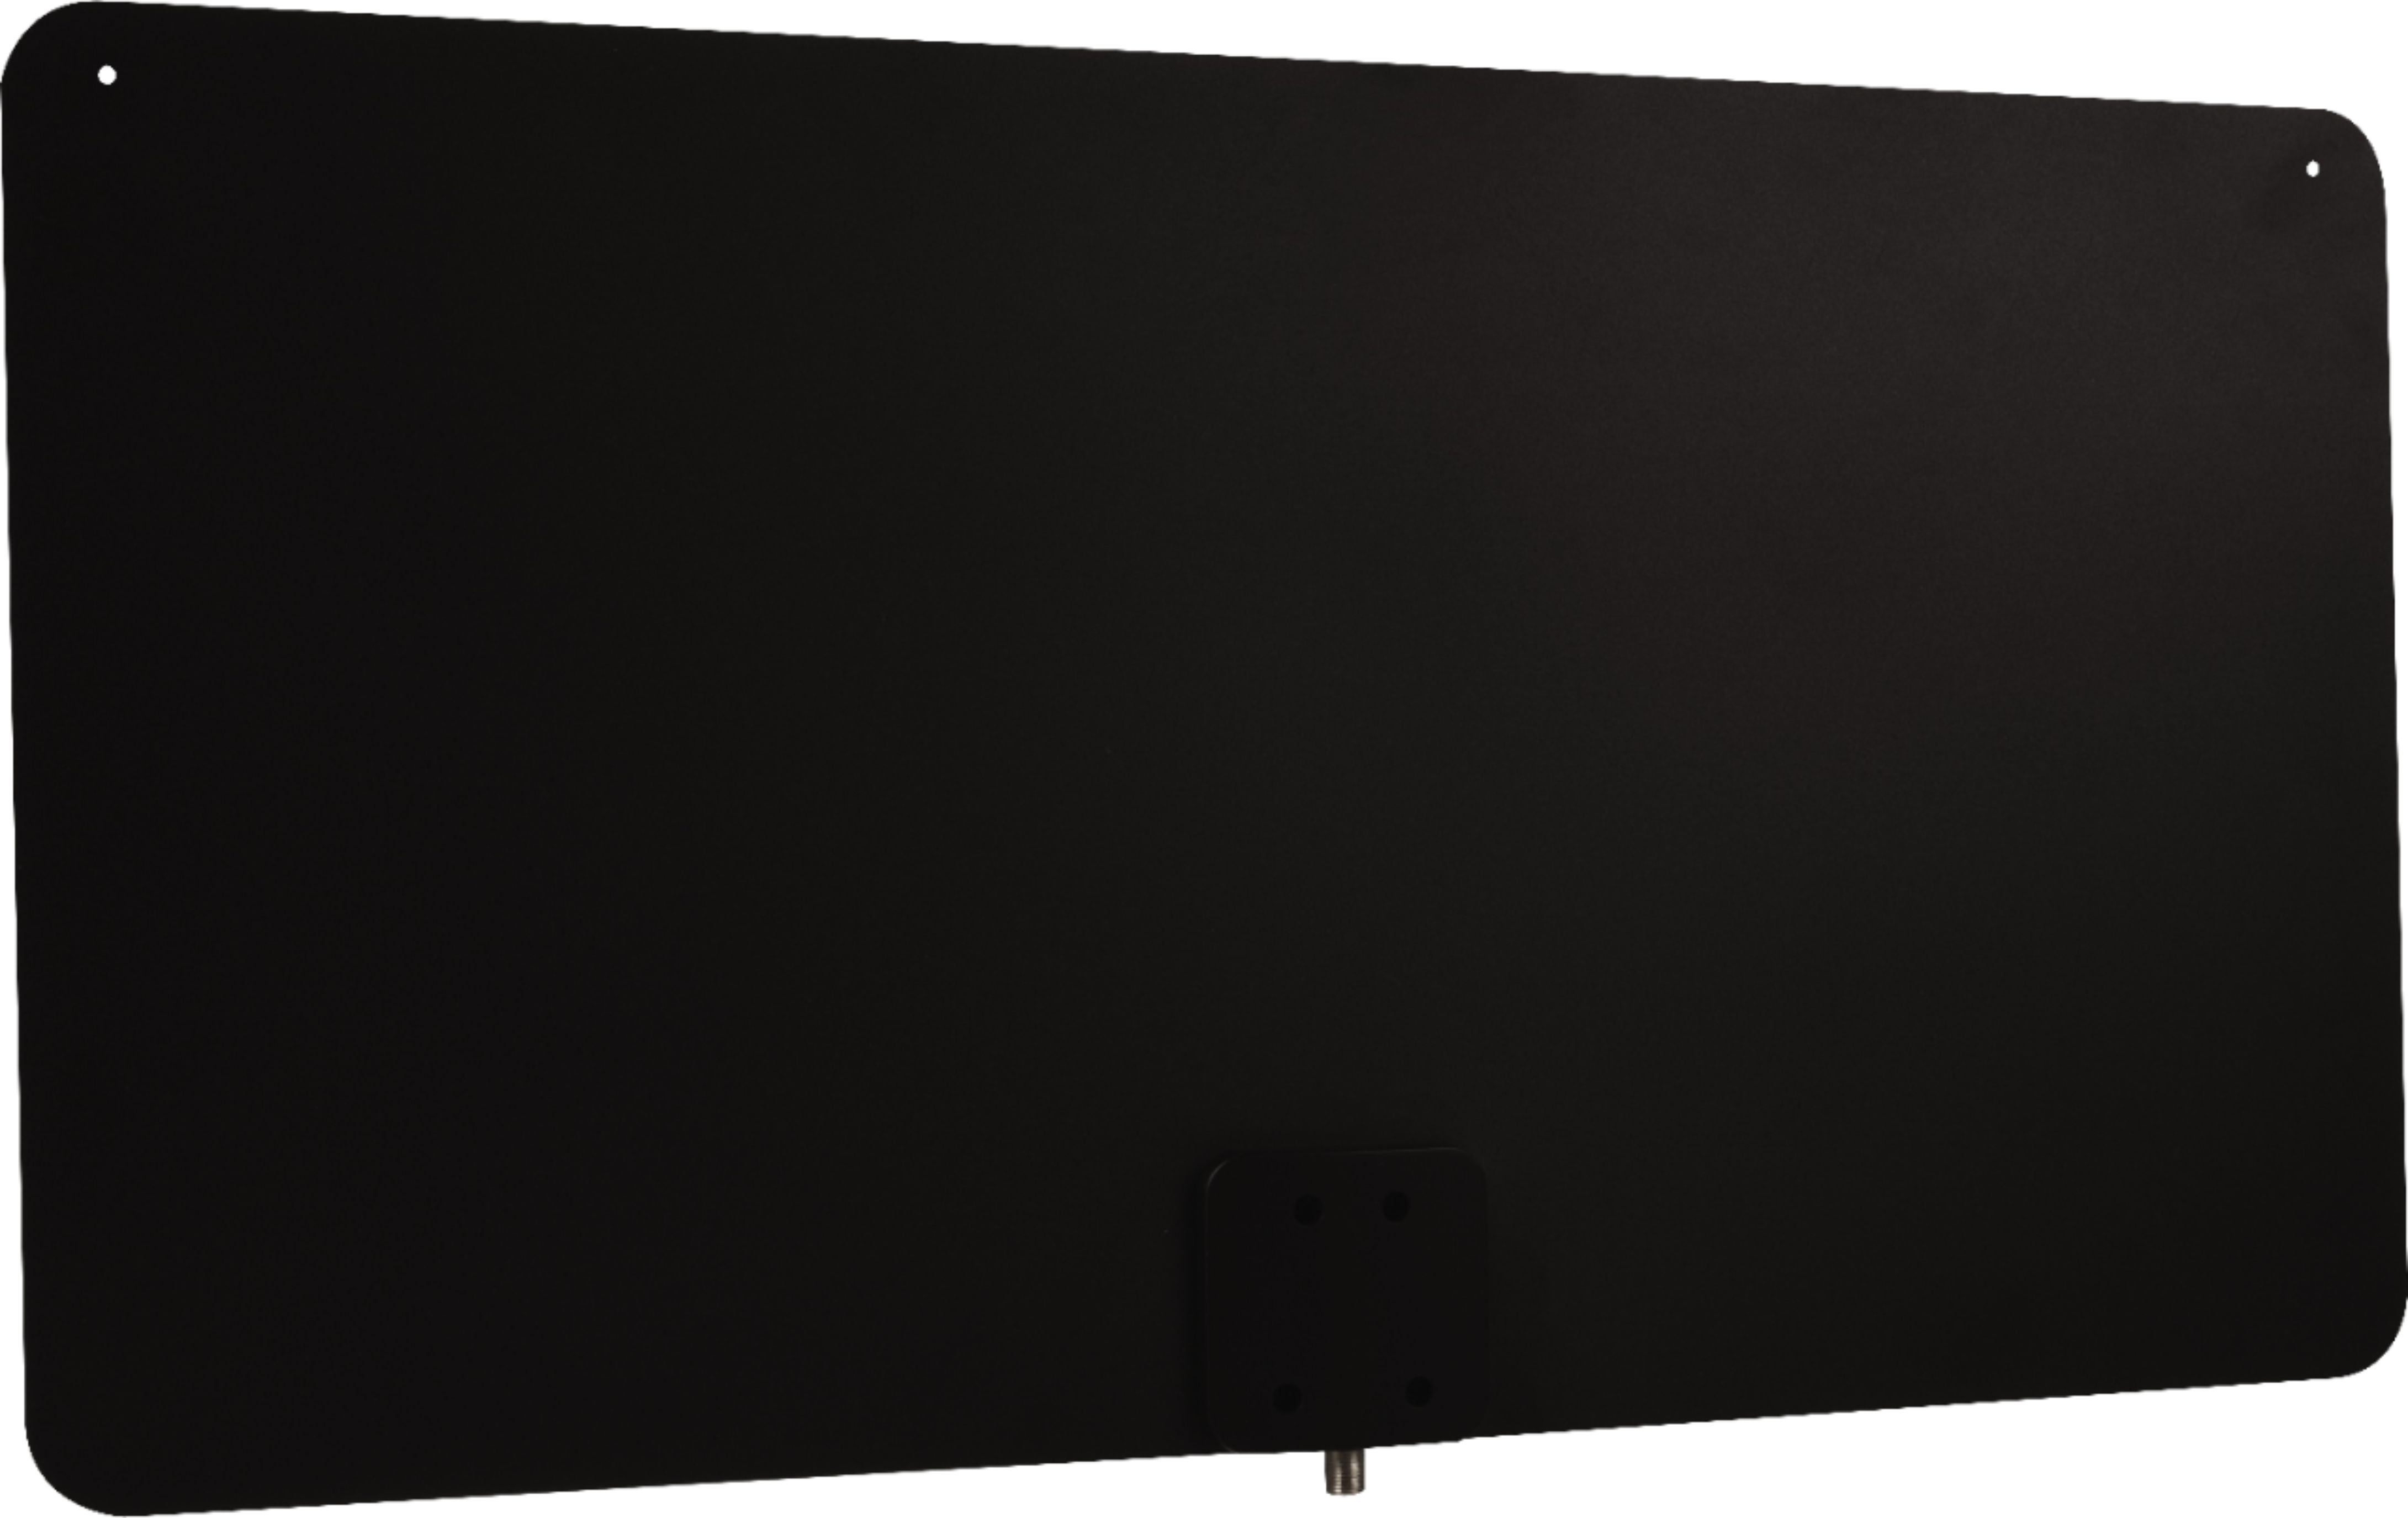 Angle View: TERK - Amplified Multi-Directional Ultra-Thin XL HDTV Antenna - Reversible for Black or White